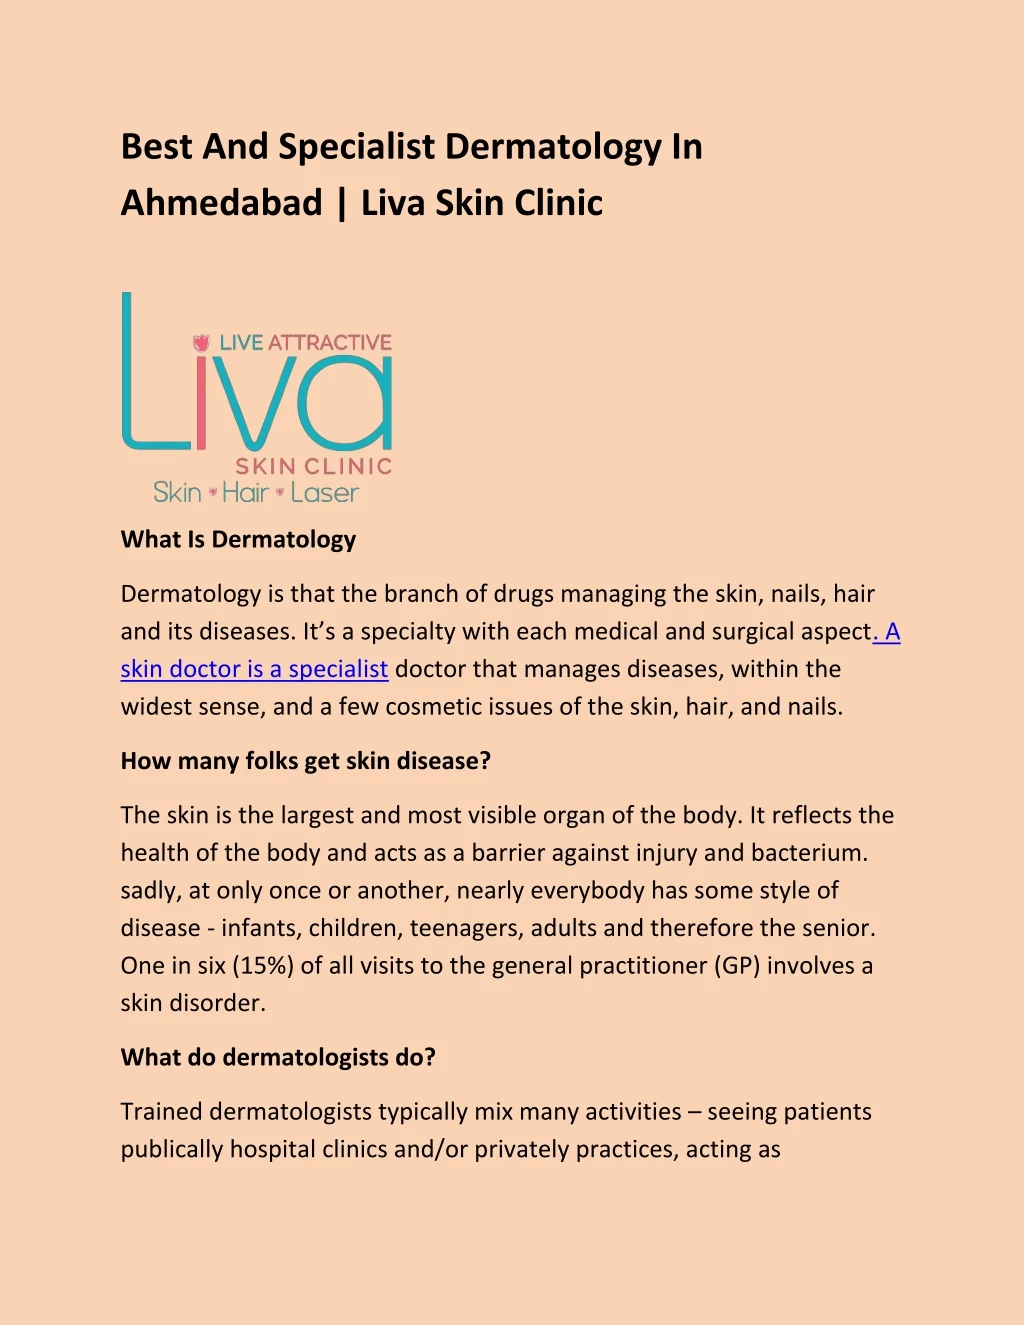 best and specialist dermatology in ahmedabad liva